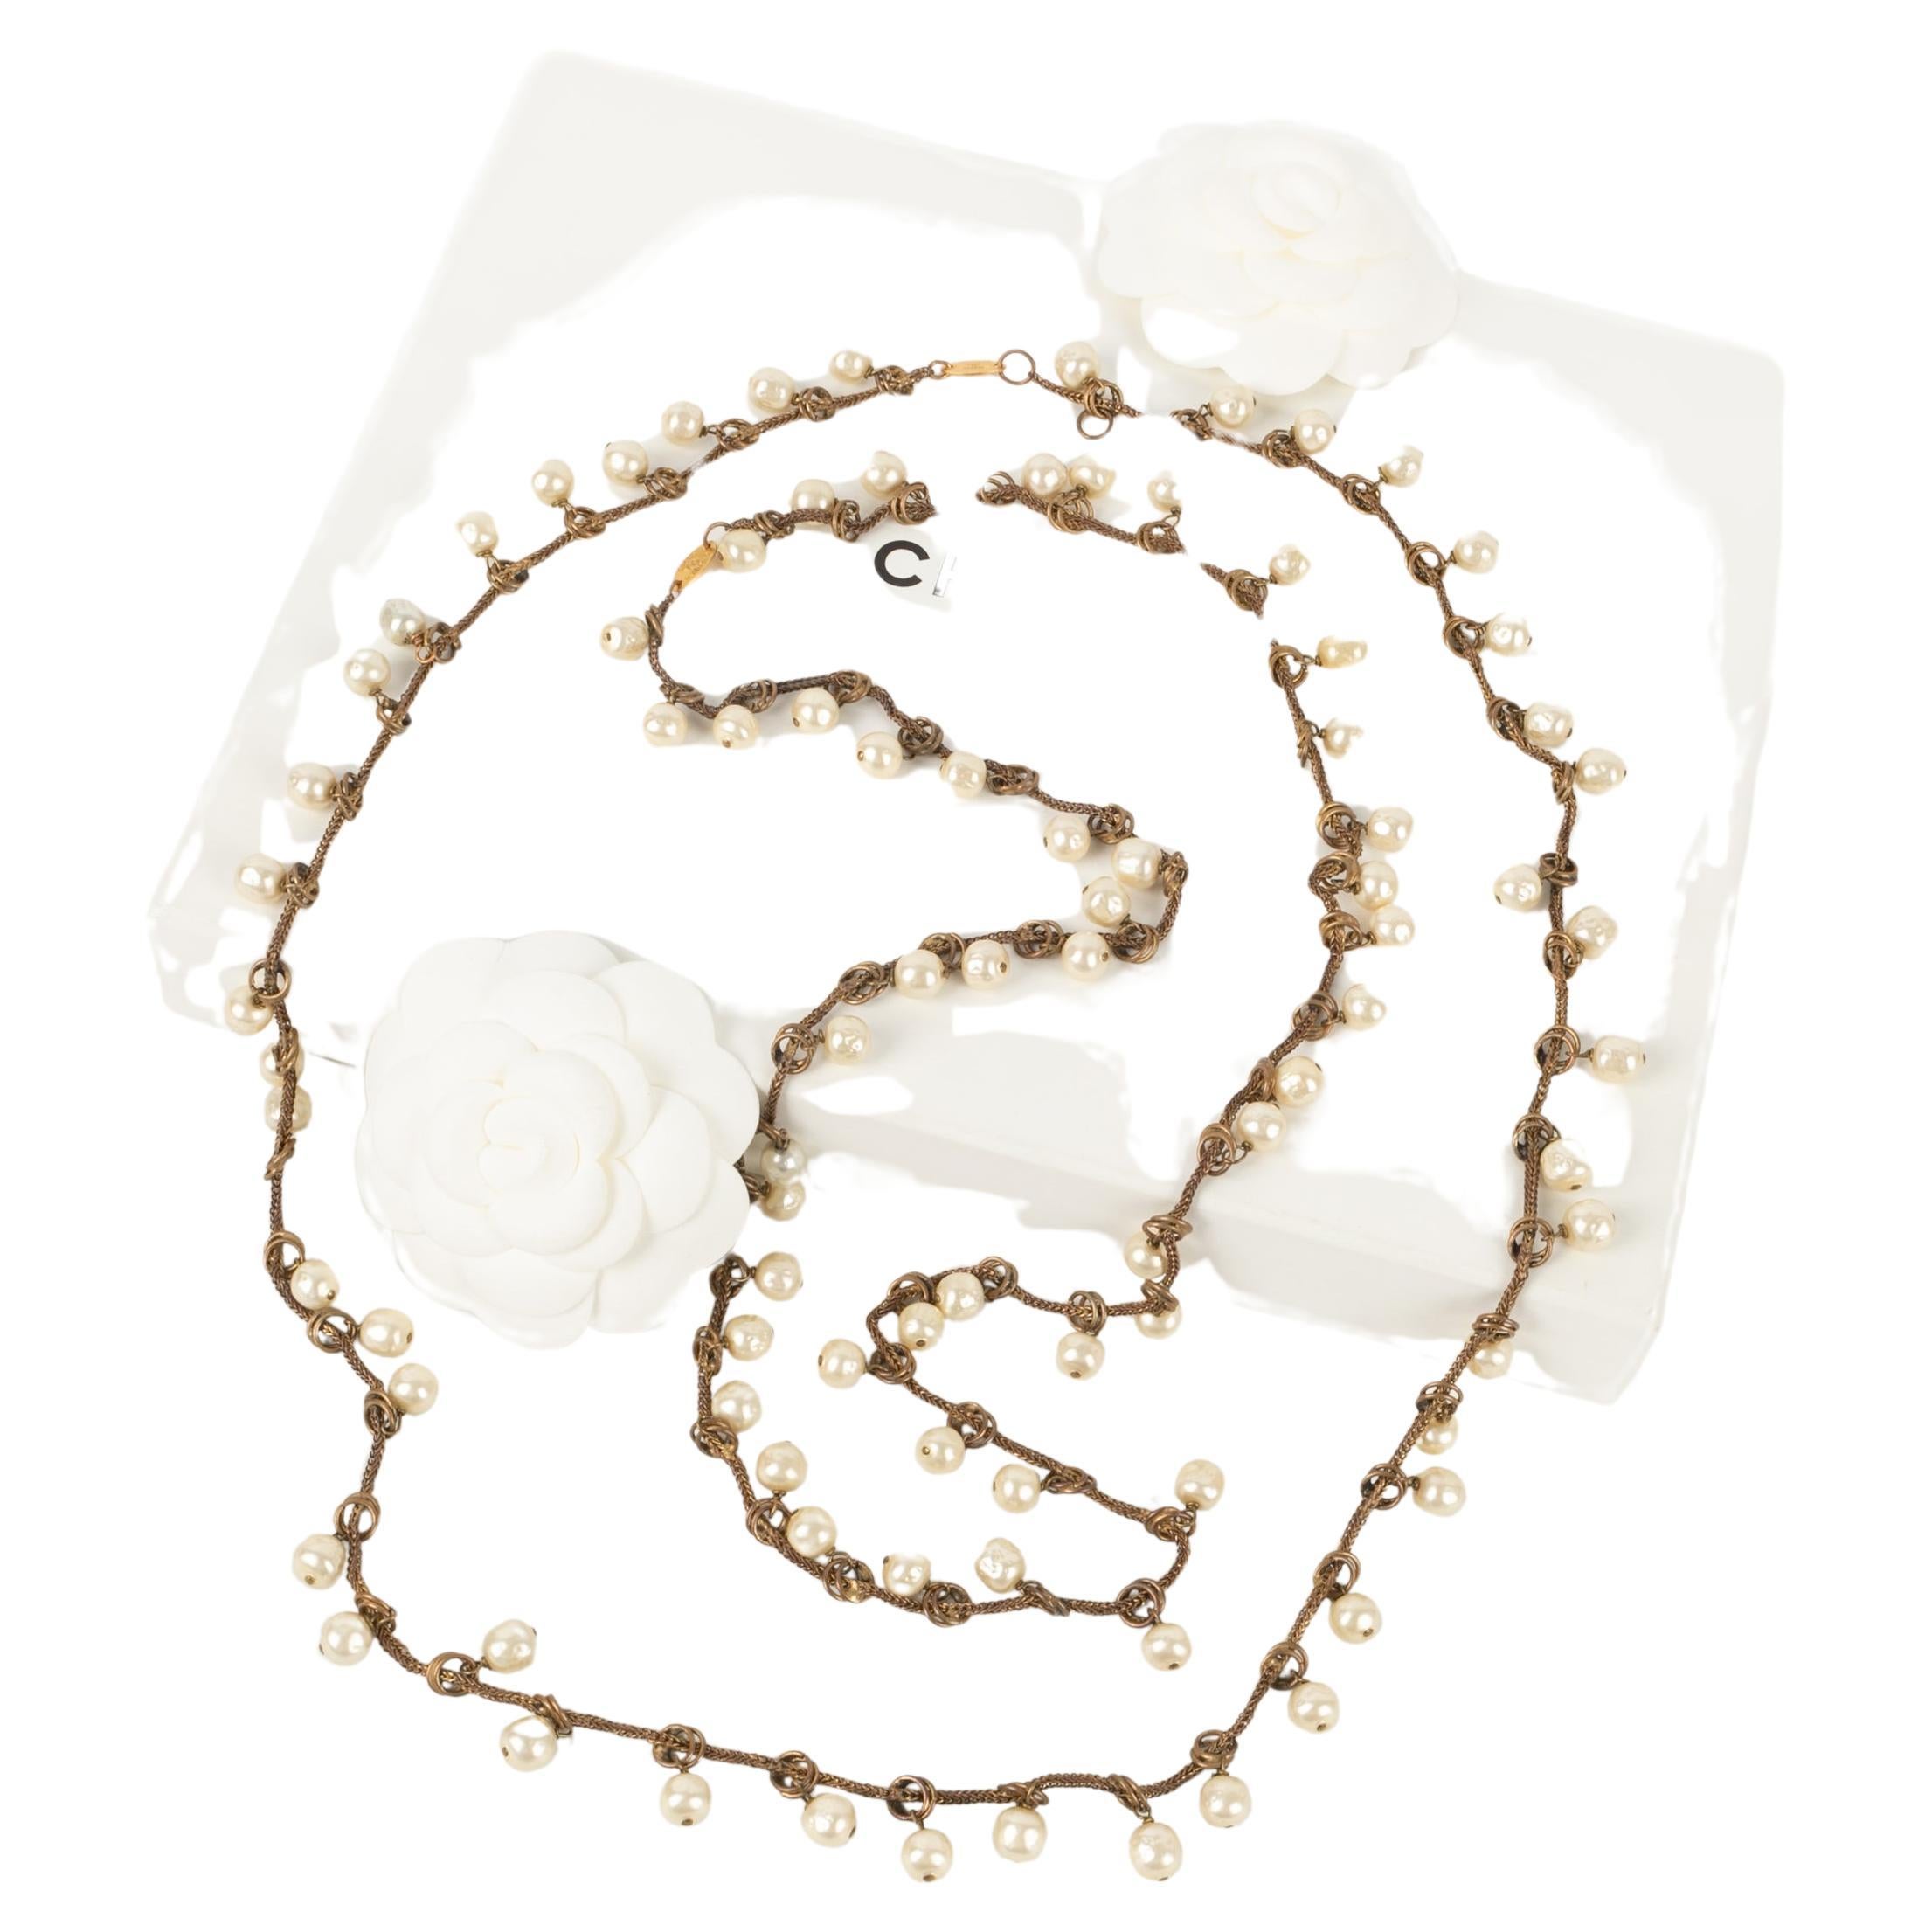 Chanel - (Made in France) Set of two dark-golden metal necklaces with costume pearls. 1983 Collection.

Additional information:
Condition: Very good condition
Dimensions: Length: 84 cm

Seller Reference: CB156
